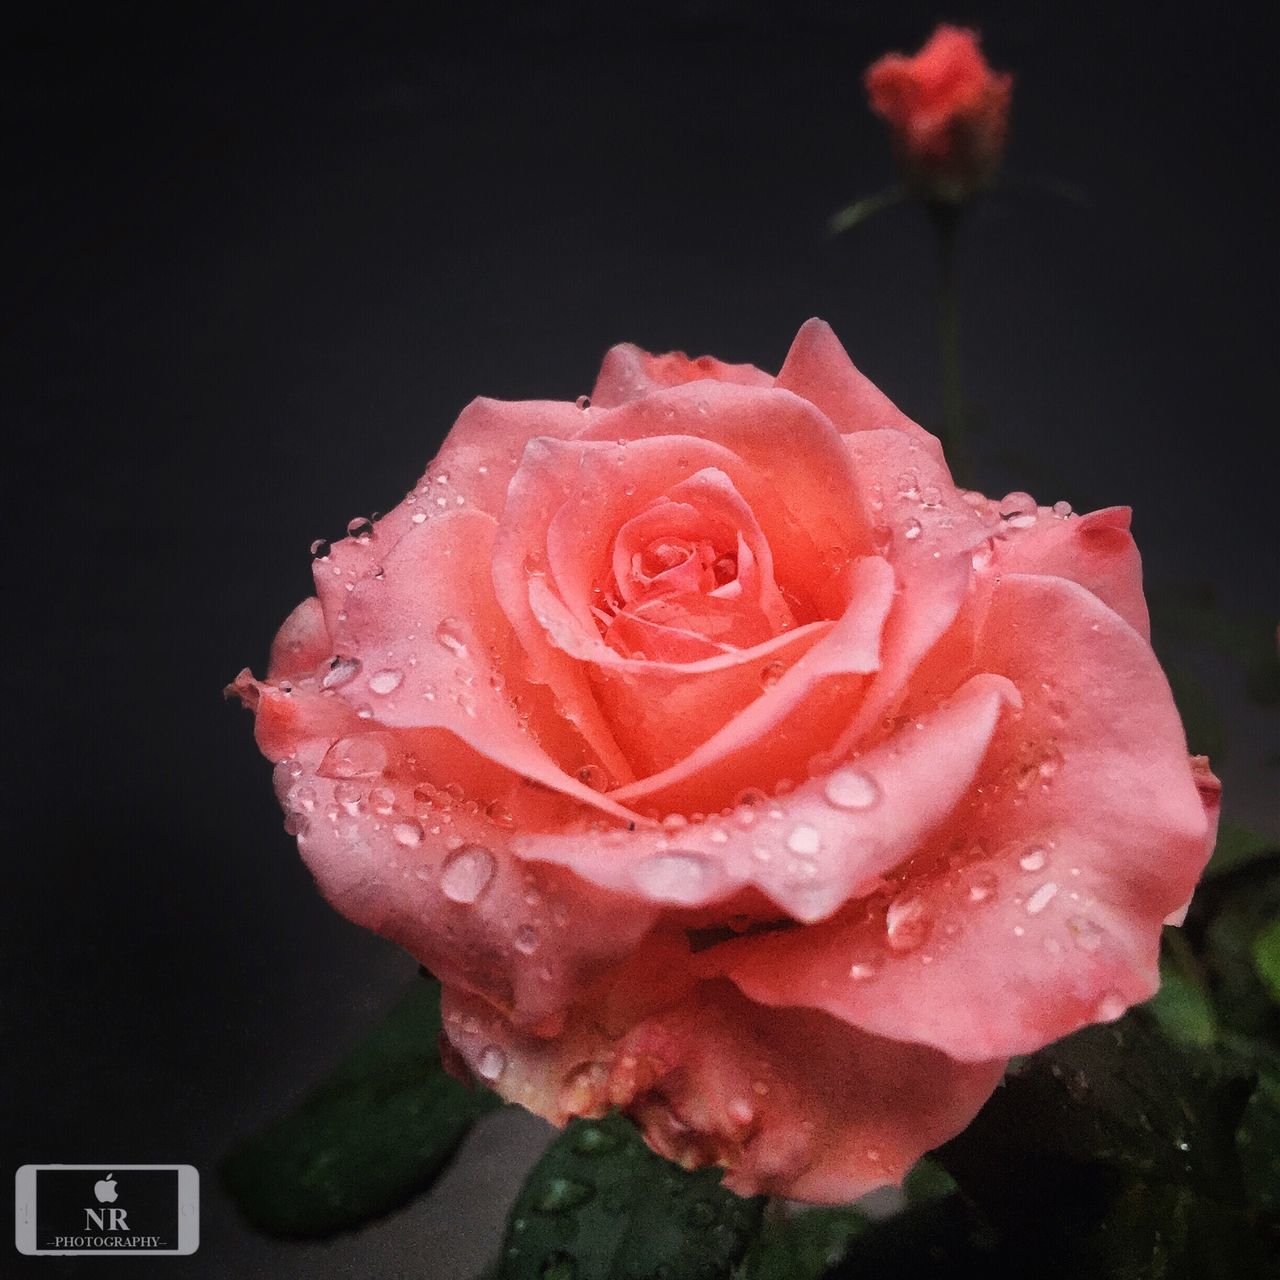 flower, petal, flower head, rose - flower, freshness, drop, fragility, water, wet, close-up, single flower, beauty in nature, rose, single rose, dew, blooming, pink color, nature, growth, focus on foreground